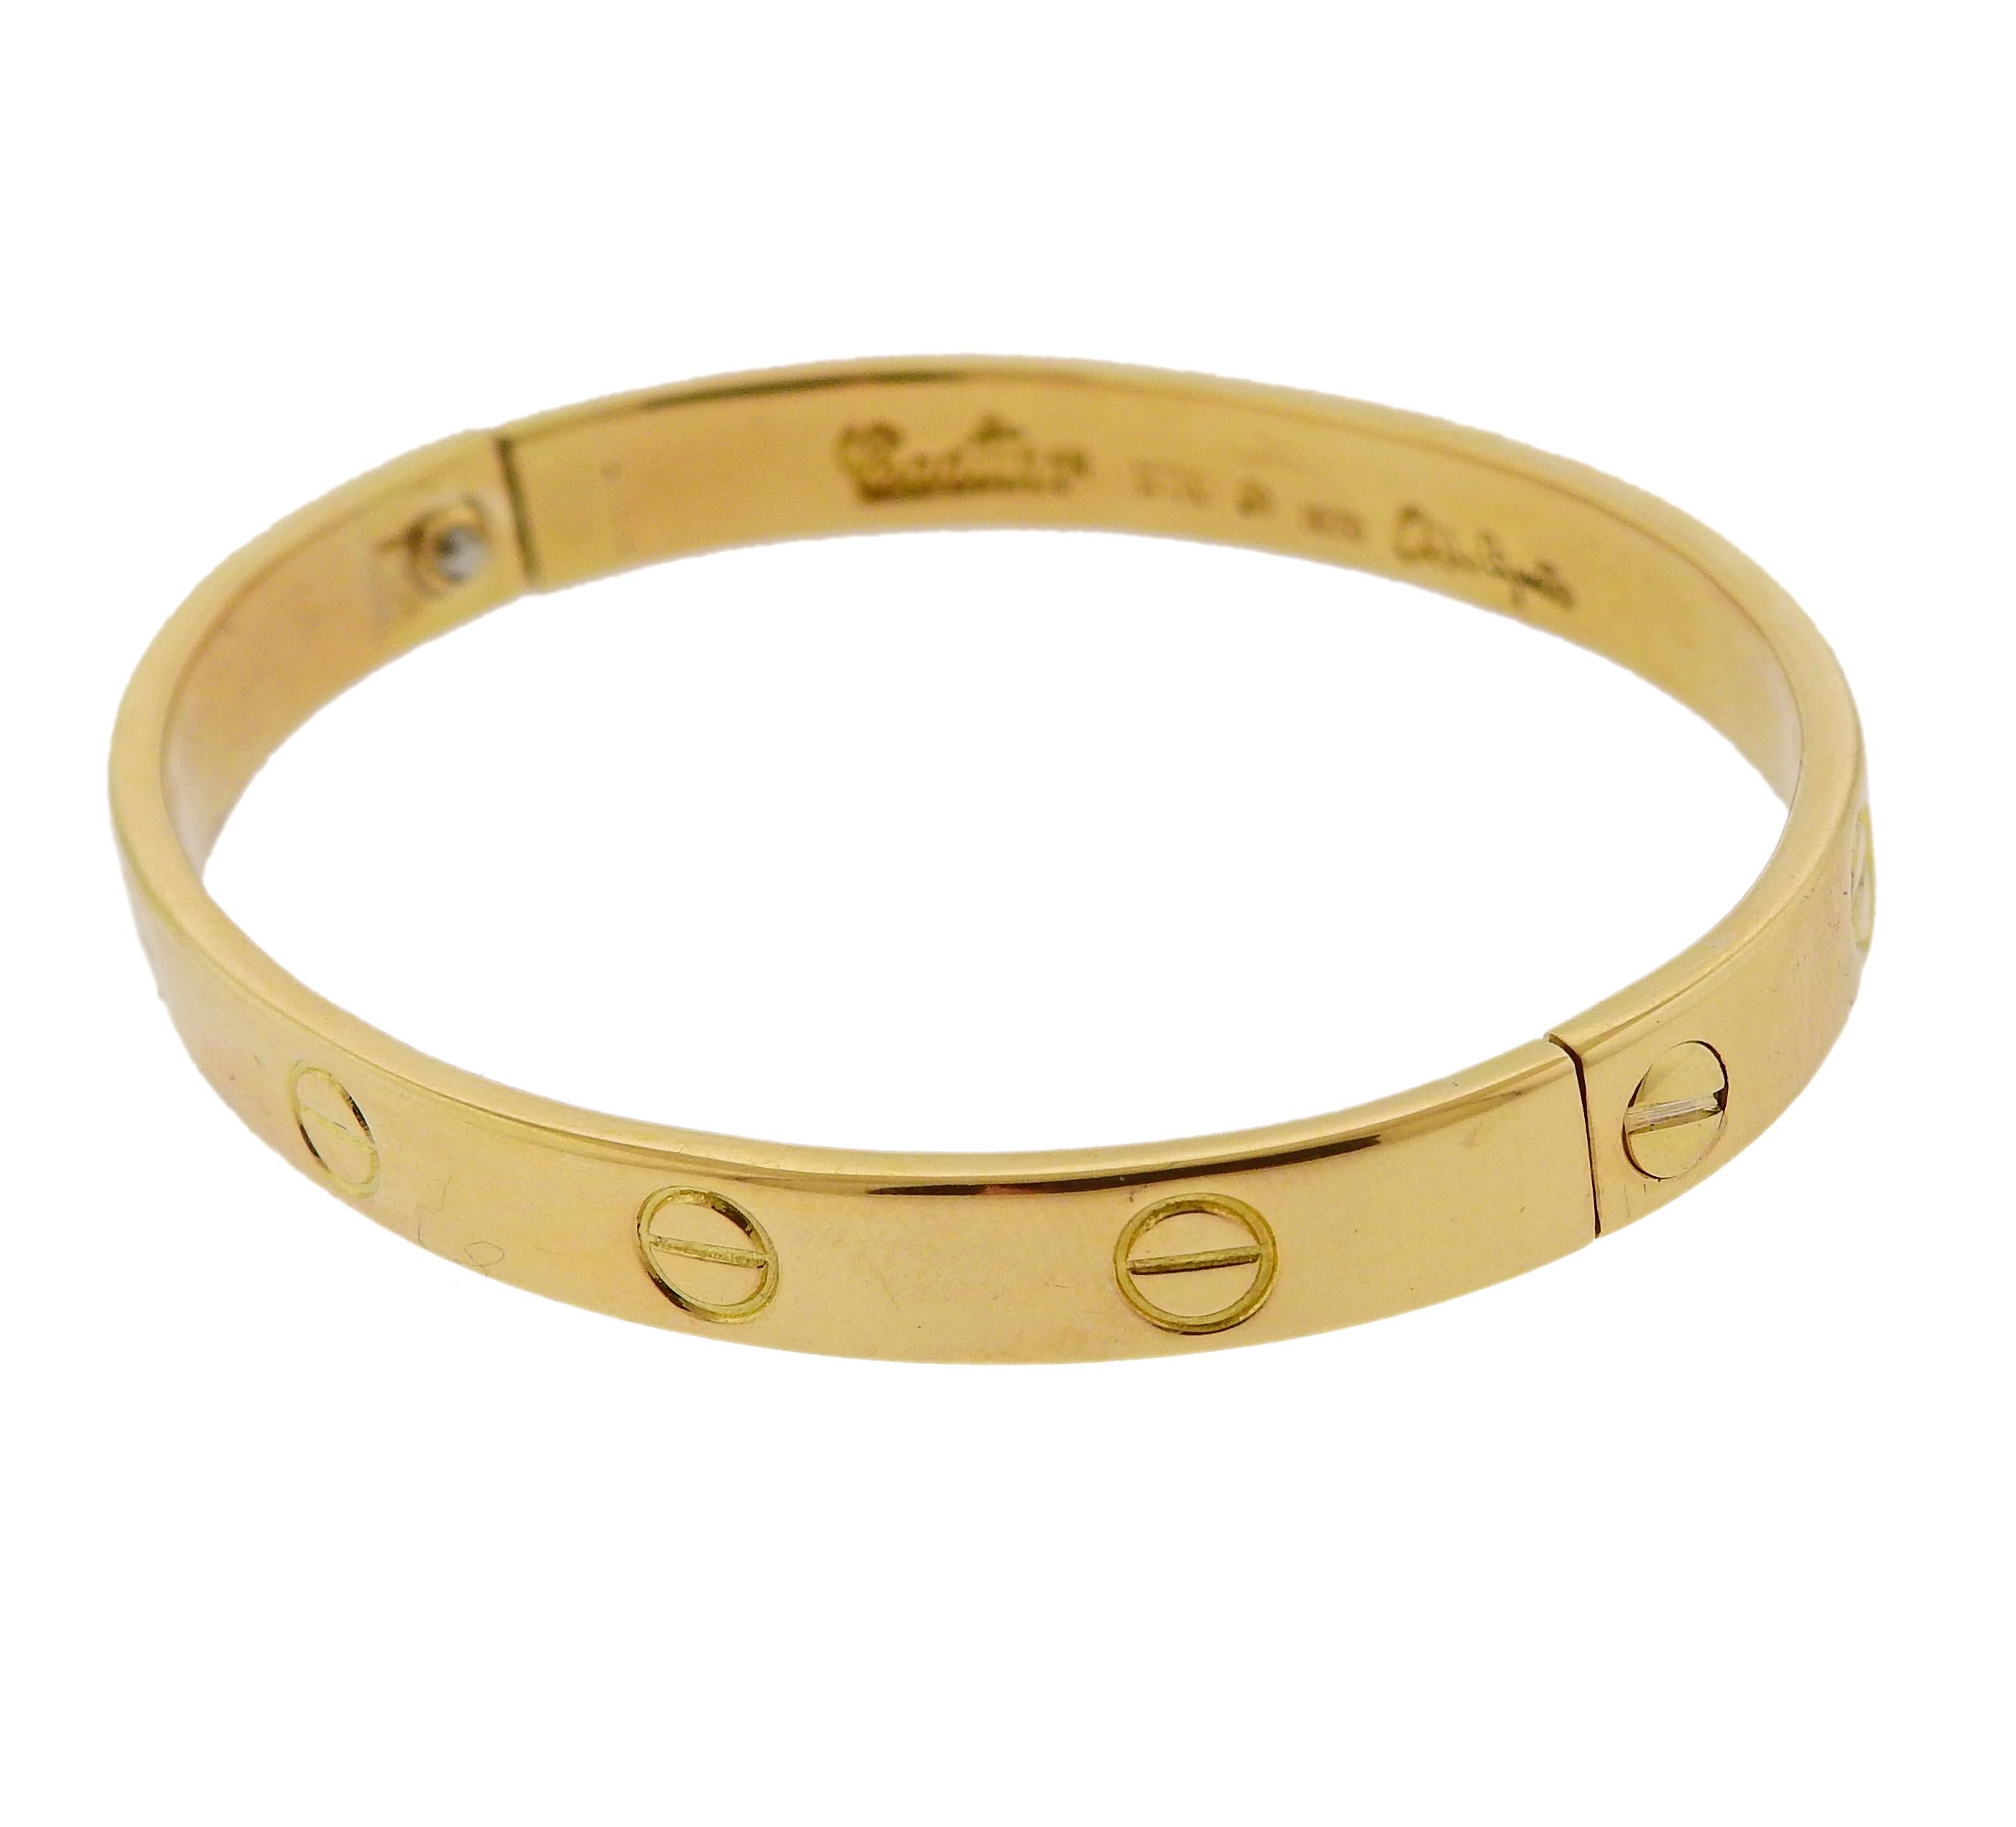 The original 1970 Cartier Love bracelet, designed and crafted by Aldo Cipullo in 18k yellow gold. The bracelet will fit up to a 6.5